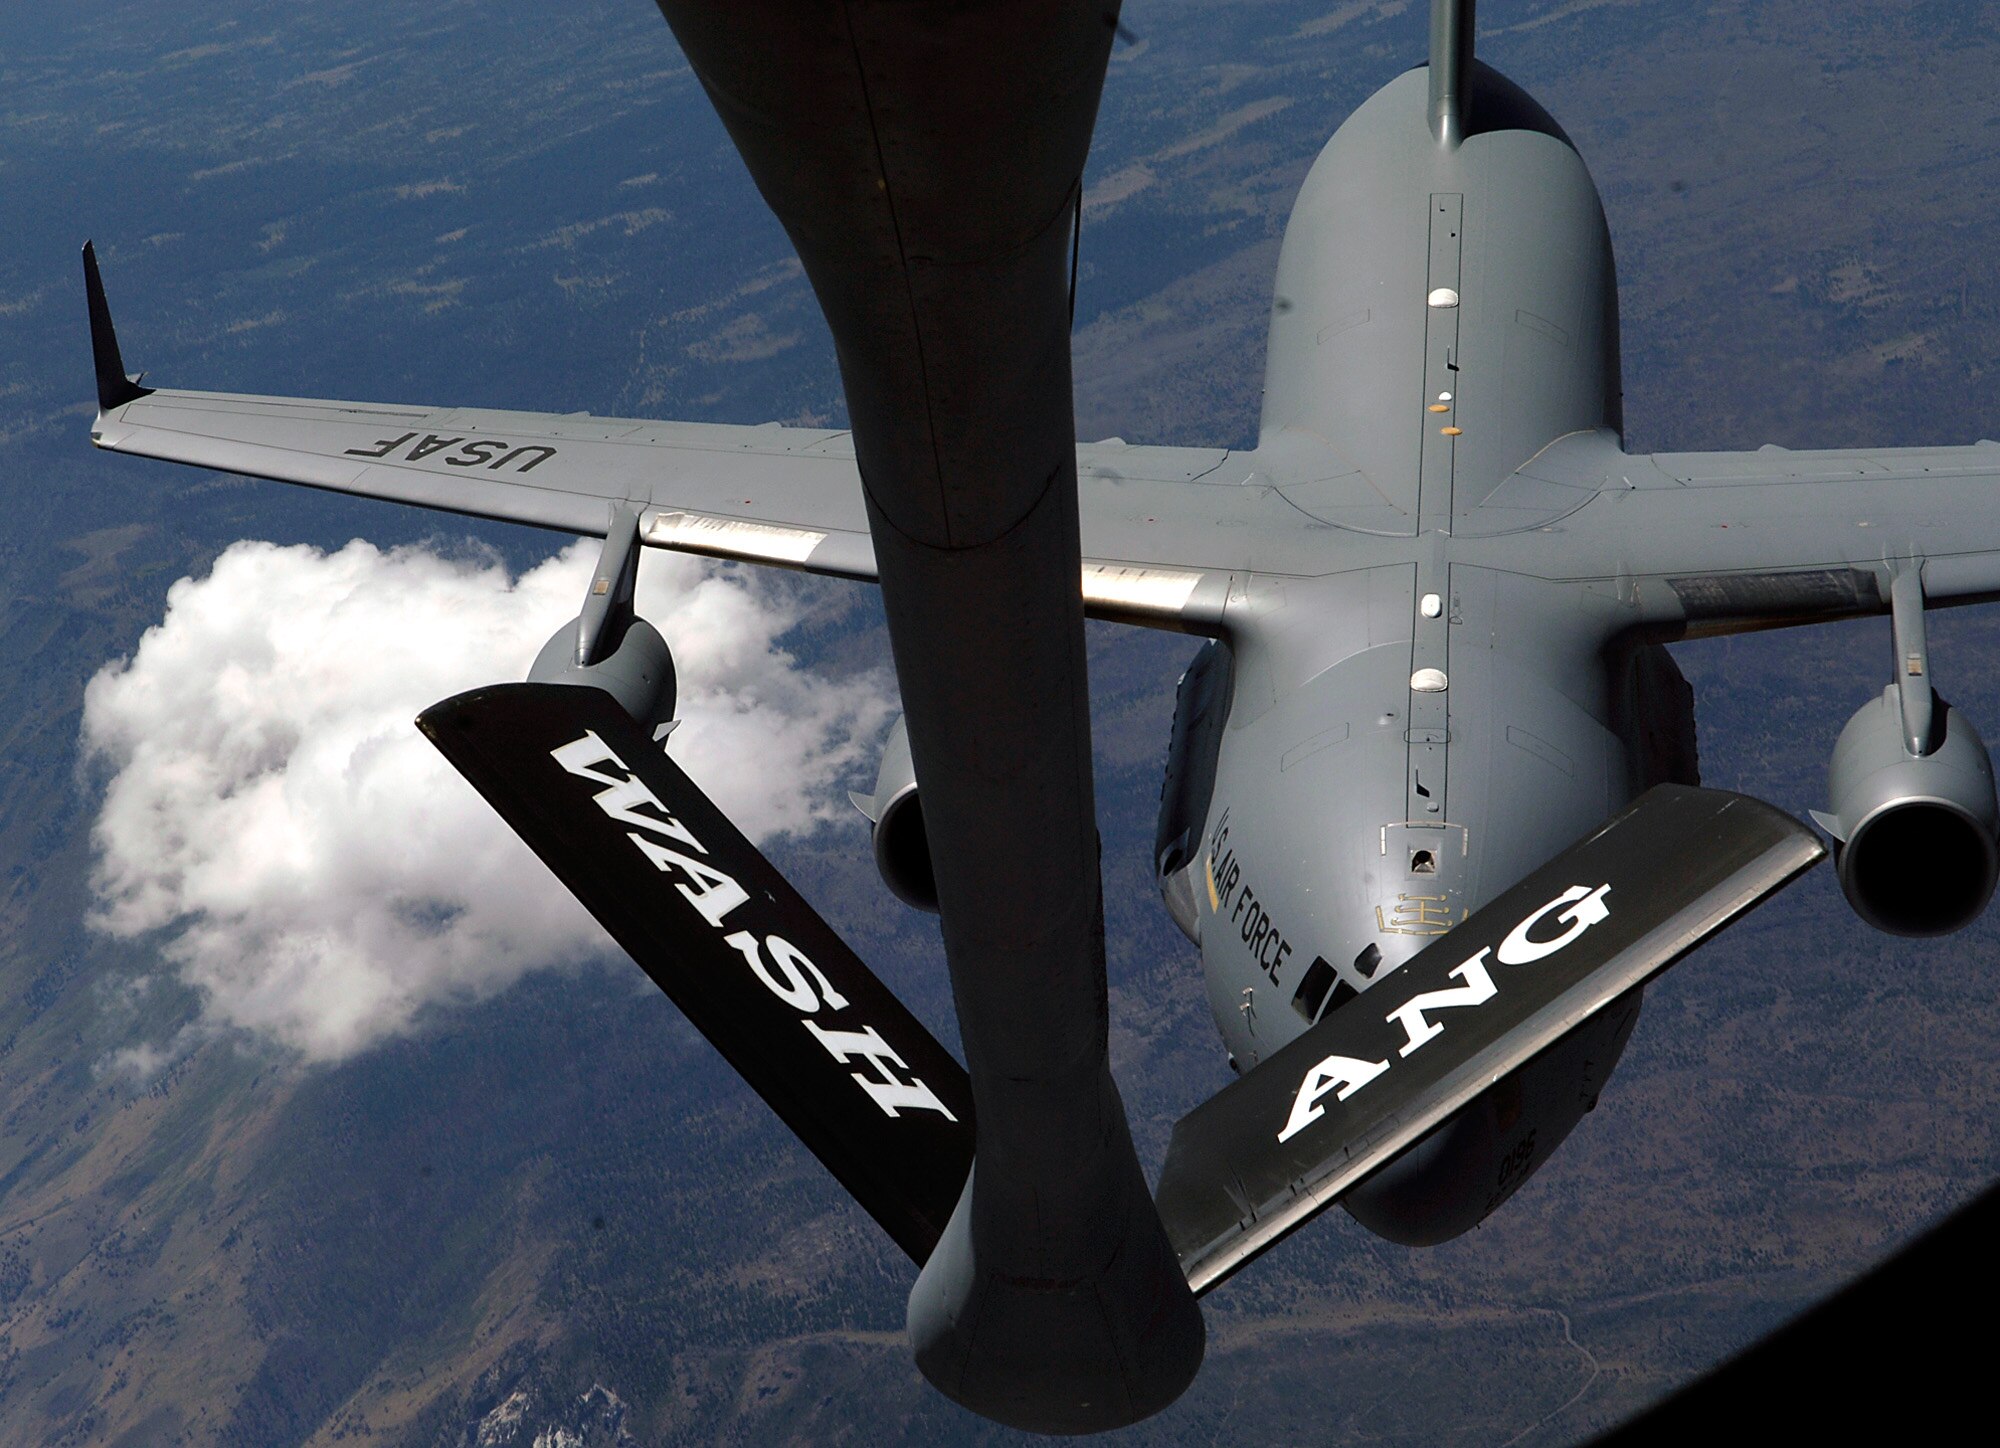 FAIRCHILD AIR FORCE BASE, Wash. – The boom of one of the 141st Air Refueling Wing’s KC-135 Stratotankers stretches out over another during a final formation flight July 7. The KC-135s will be relocated to the 185th Air Refueling Wing in Sioux City, Iowa. The 141st ARW will continue to work alongside the 92nd Air Refueling Wing. (U.S. Air Force photo/Airman 1st Class Joshua Chapman)